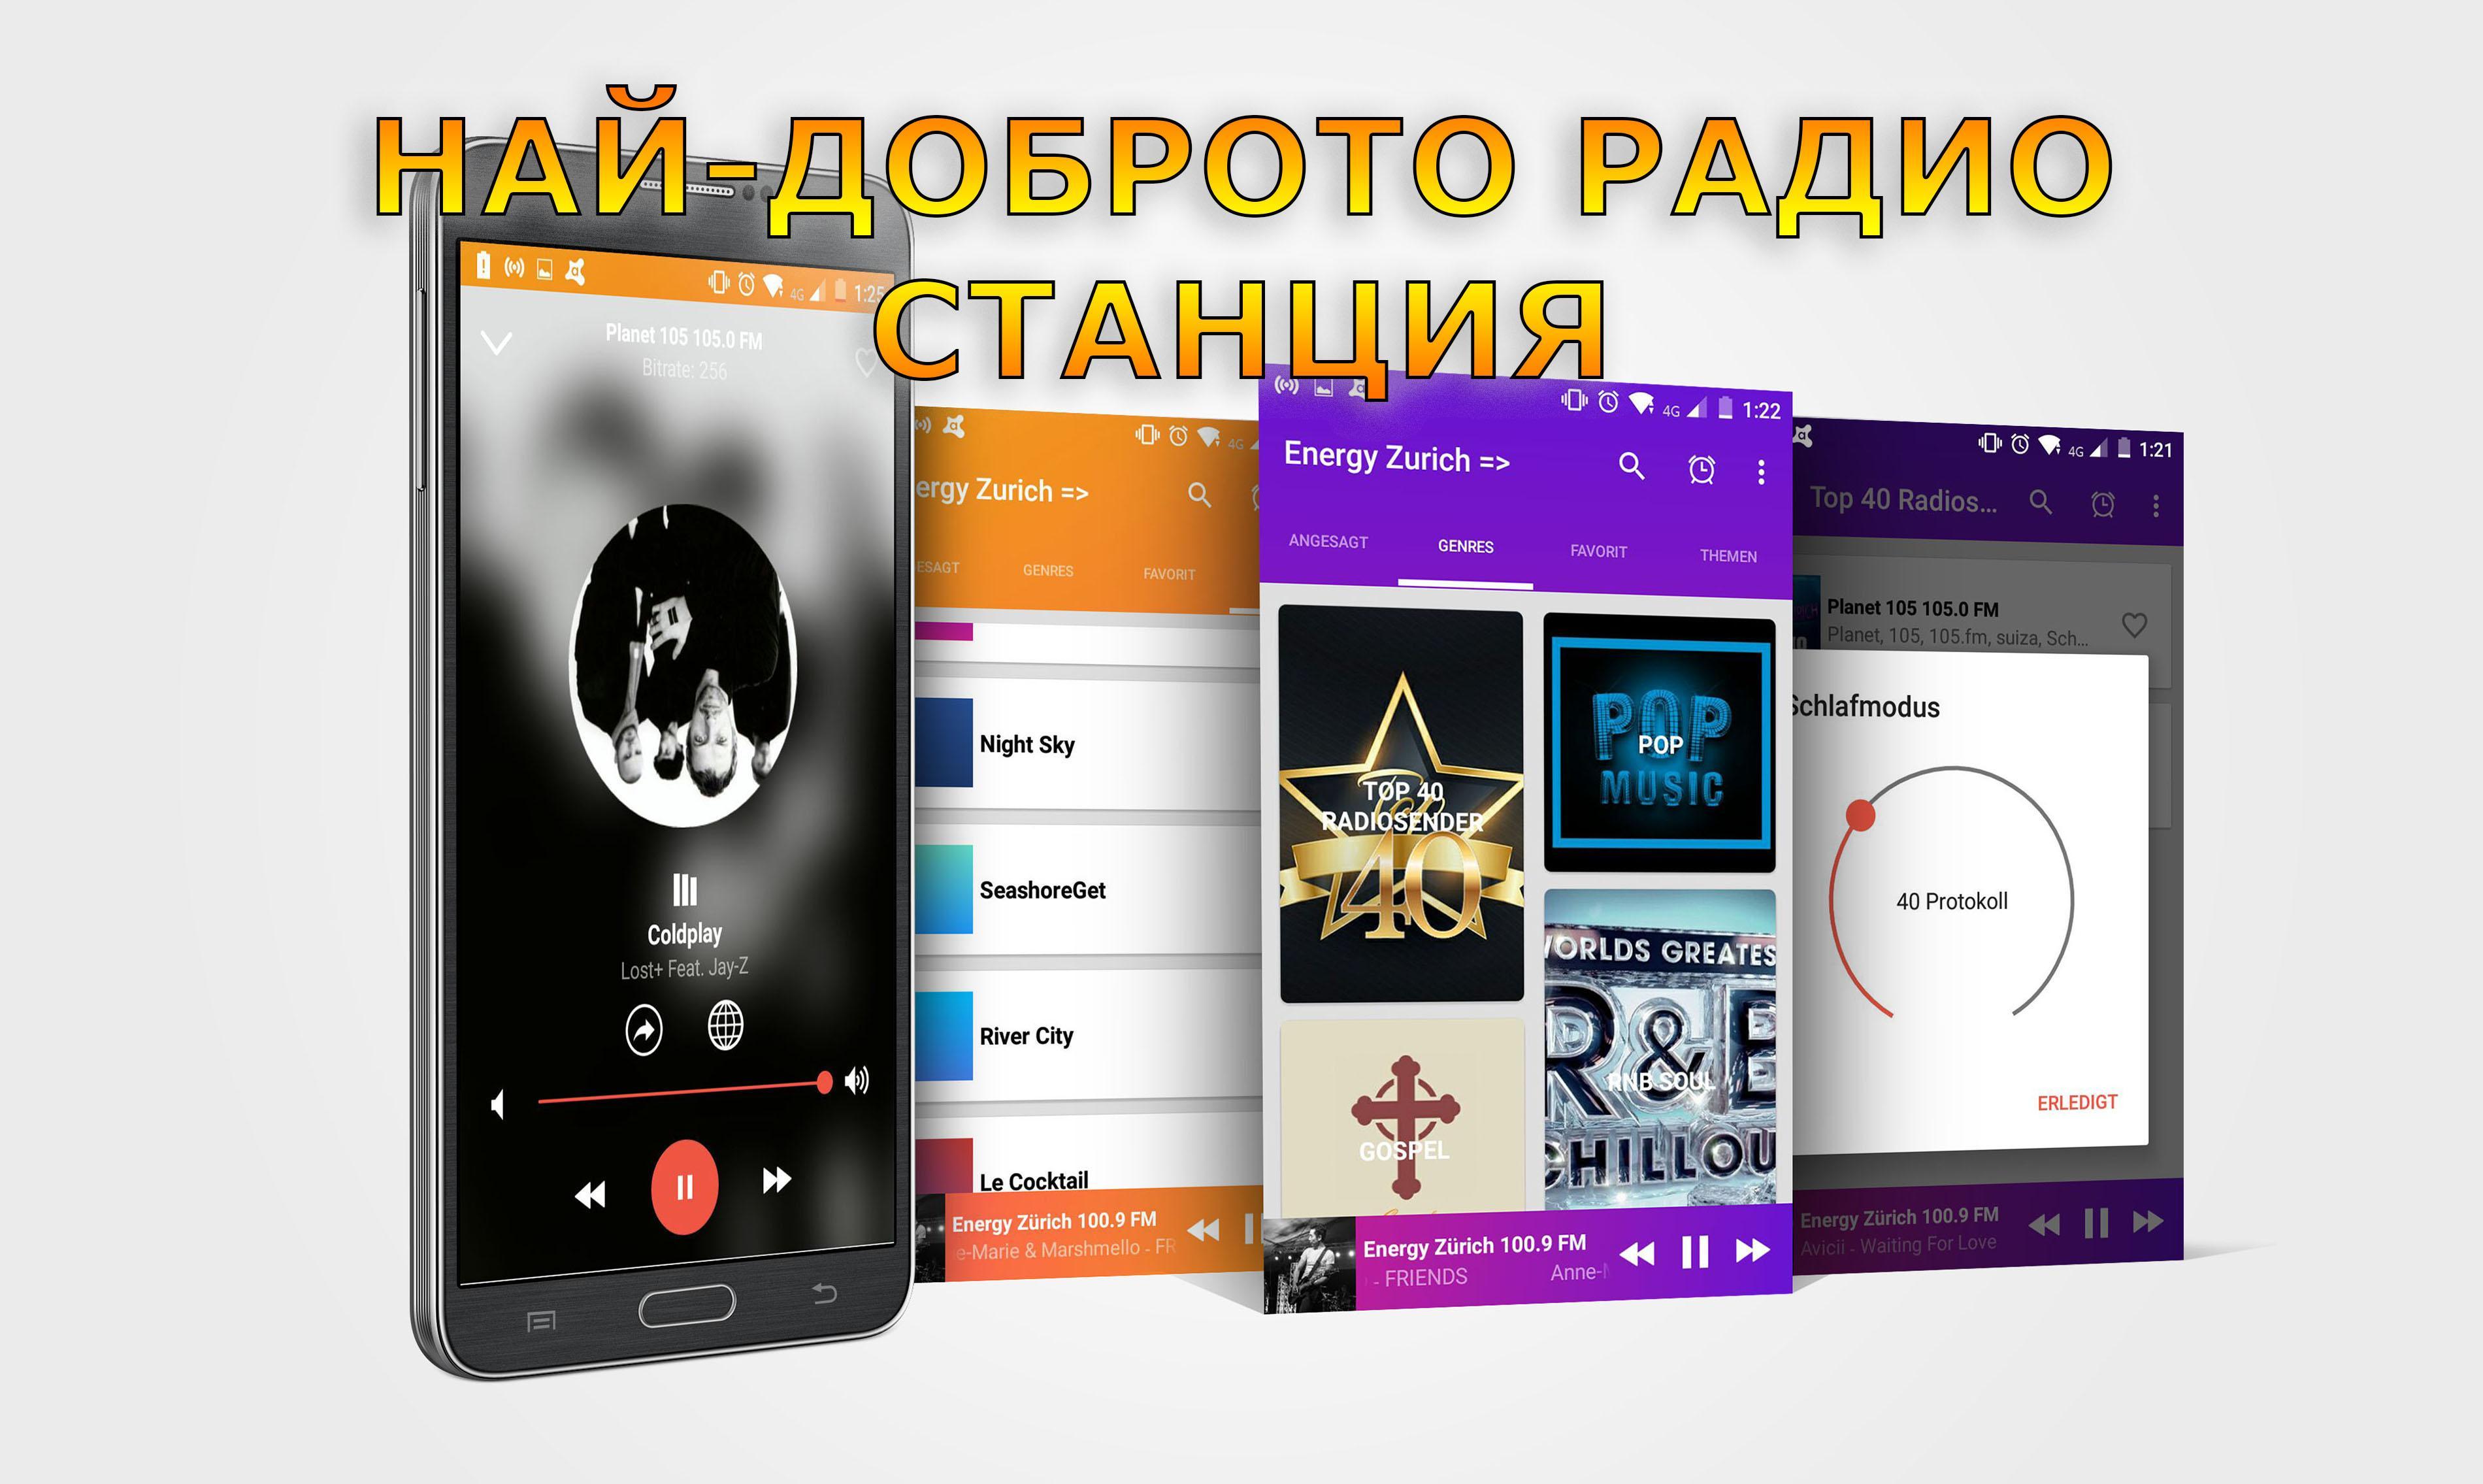 Katra FM 100 for Android - APK Download